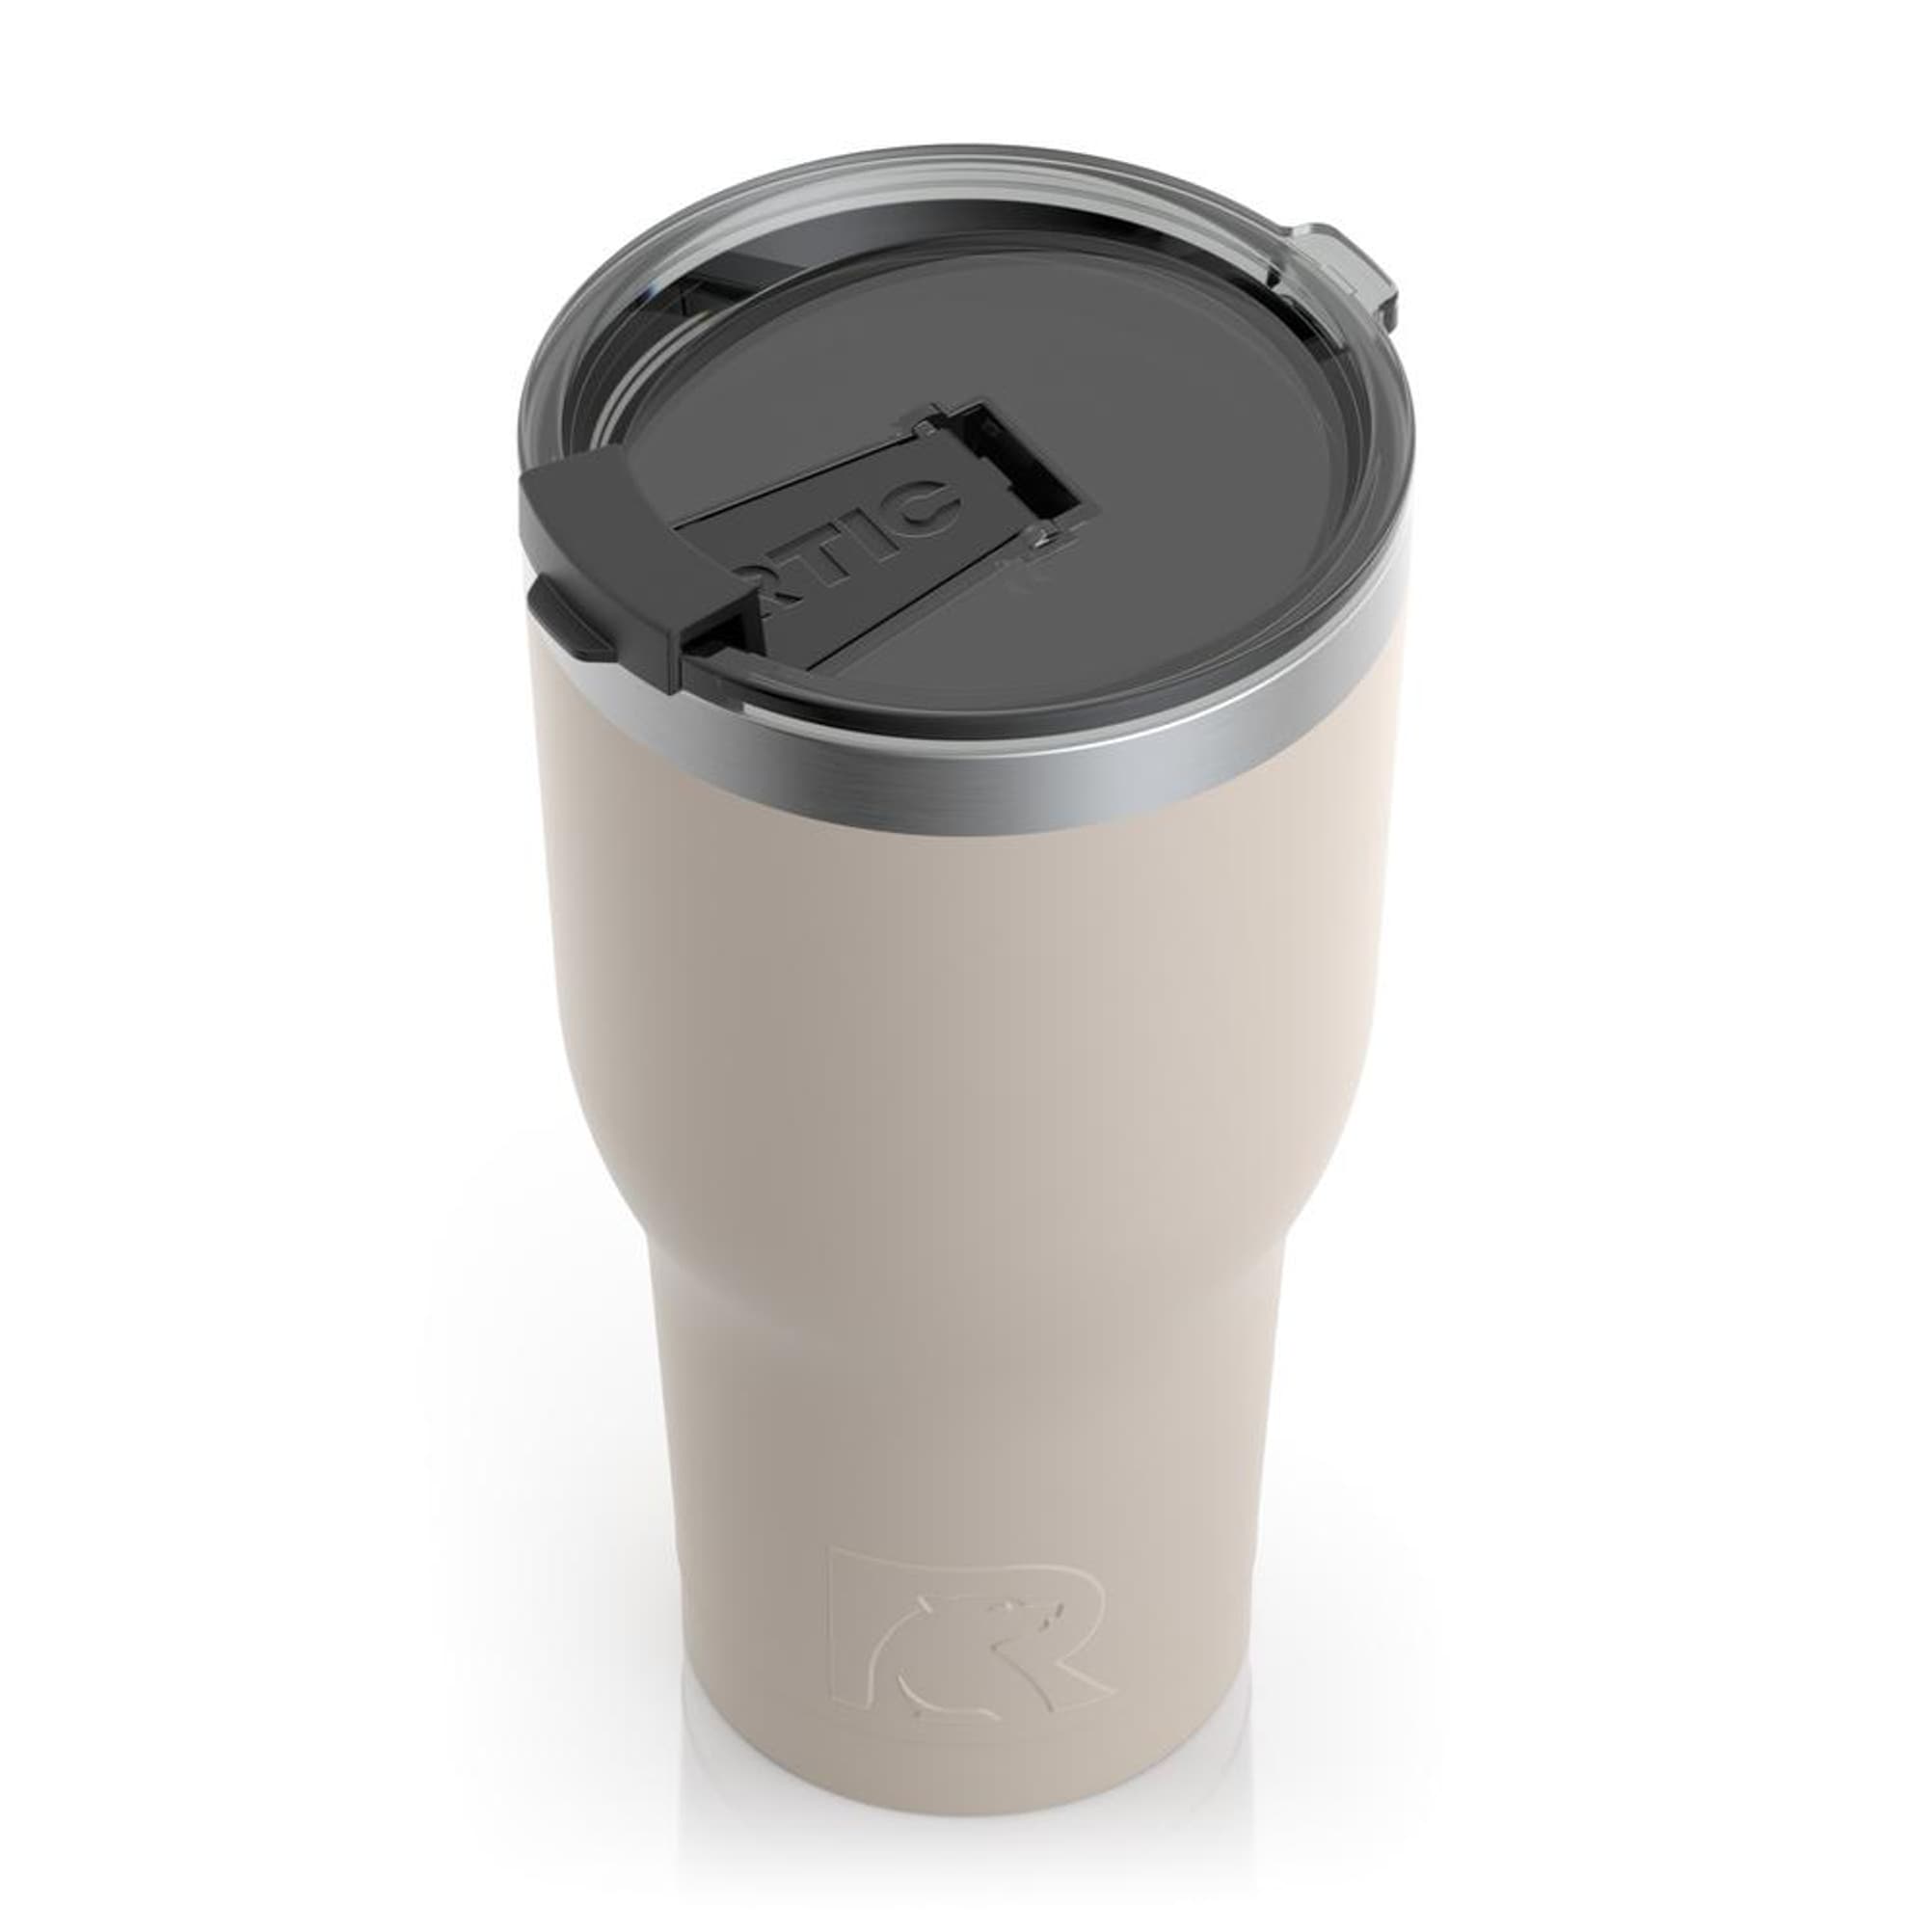 RTIC 20 oz Coffee Travel Mug with Lid and Handle, Stainless Steel  Vacuum-Insulated Mugs, Leak, Spill Proof, Hot Beverage and Cold, Portable Thermal  Tumbler Cup for Car, Camping, Graphite 